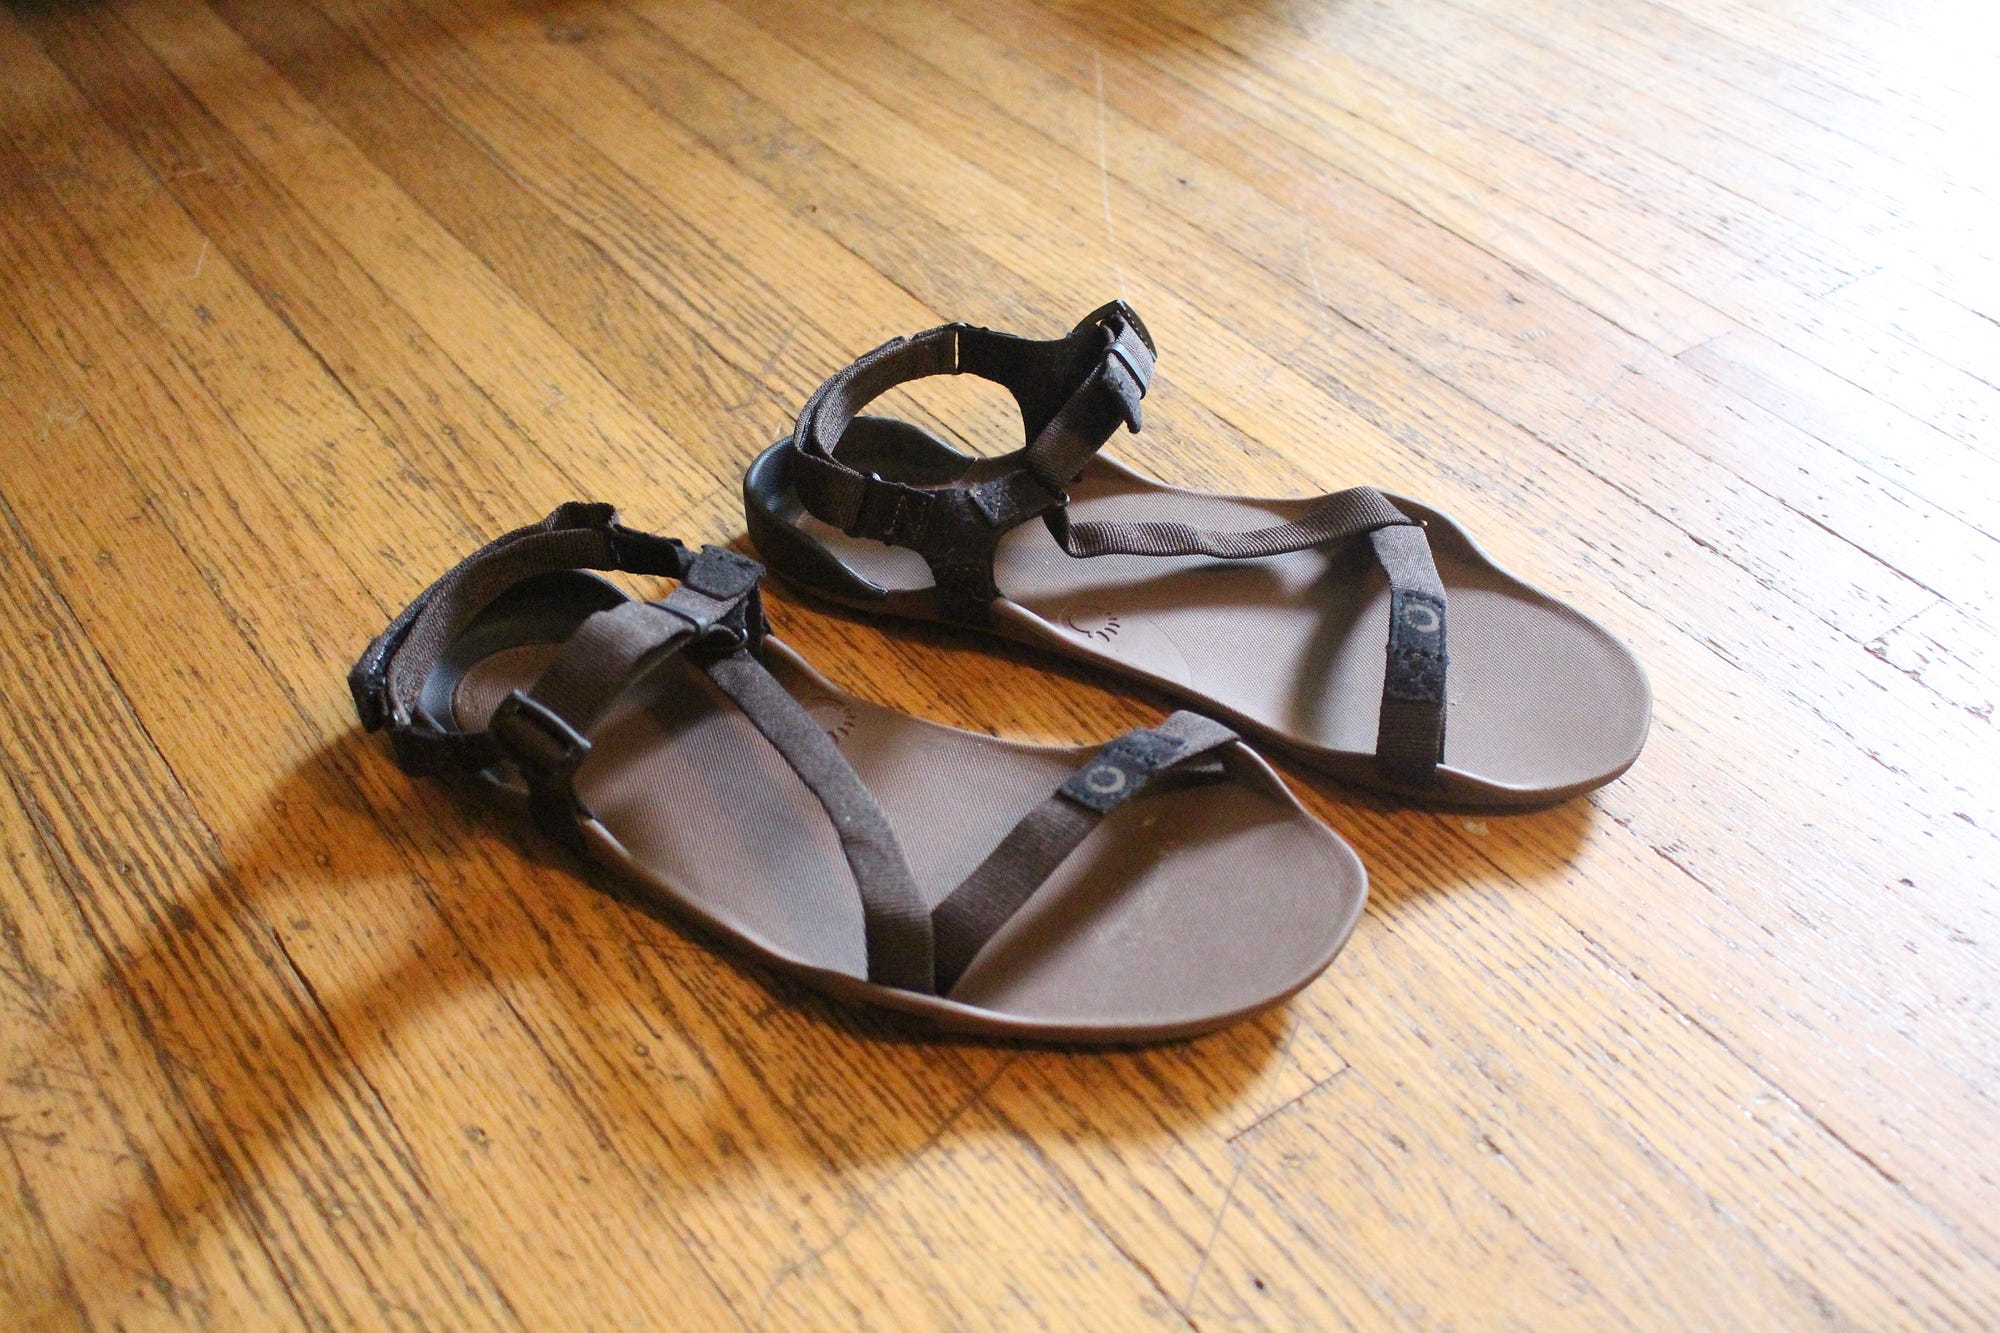 Xero Shoes' Z-Trail Sandals Are the Best Shoes I've Worn, and They're  Hardly Shoes at All